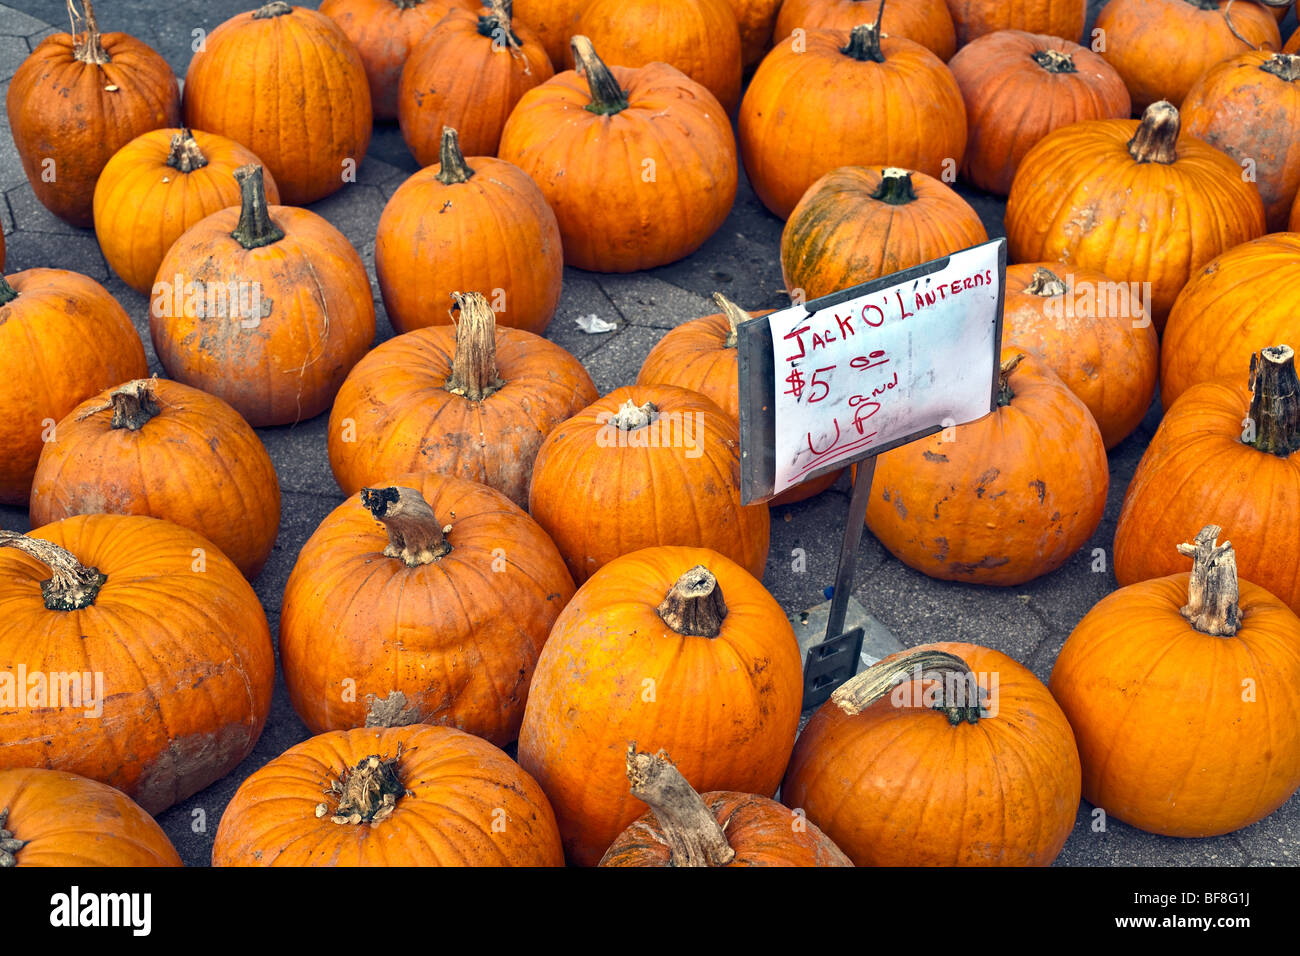 brilliant orange Halloween pumpkins, some caked with mud, displayed for sale at the Union Square farmers green market NYC Stock Photo